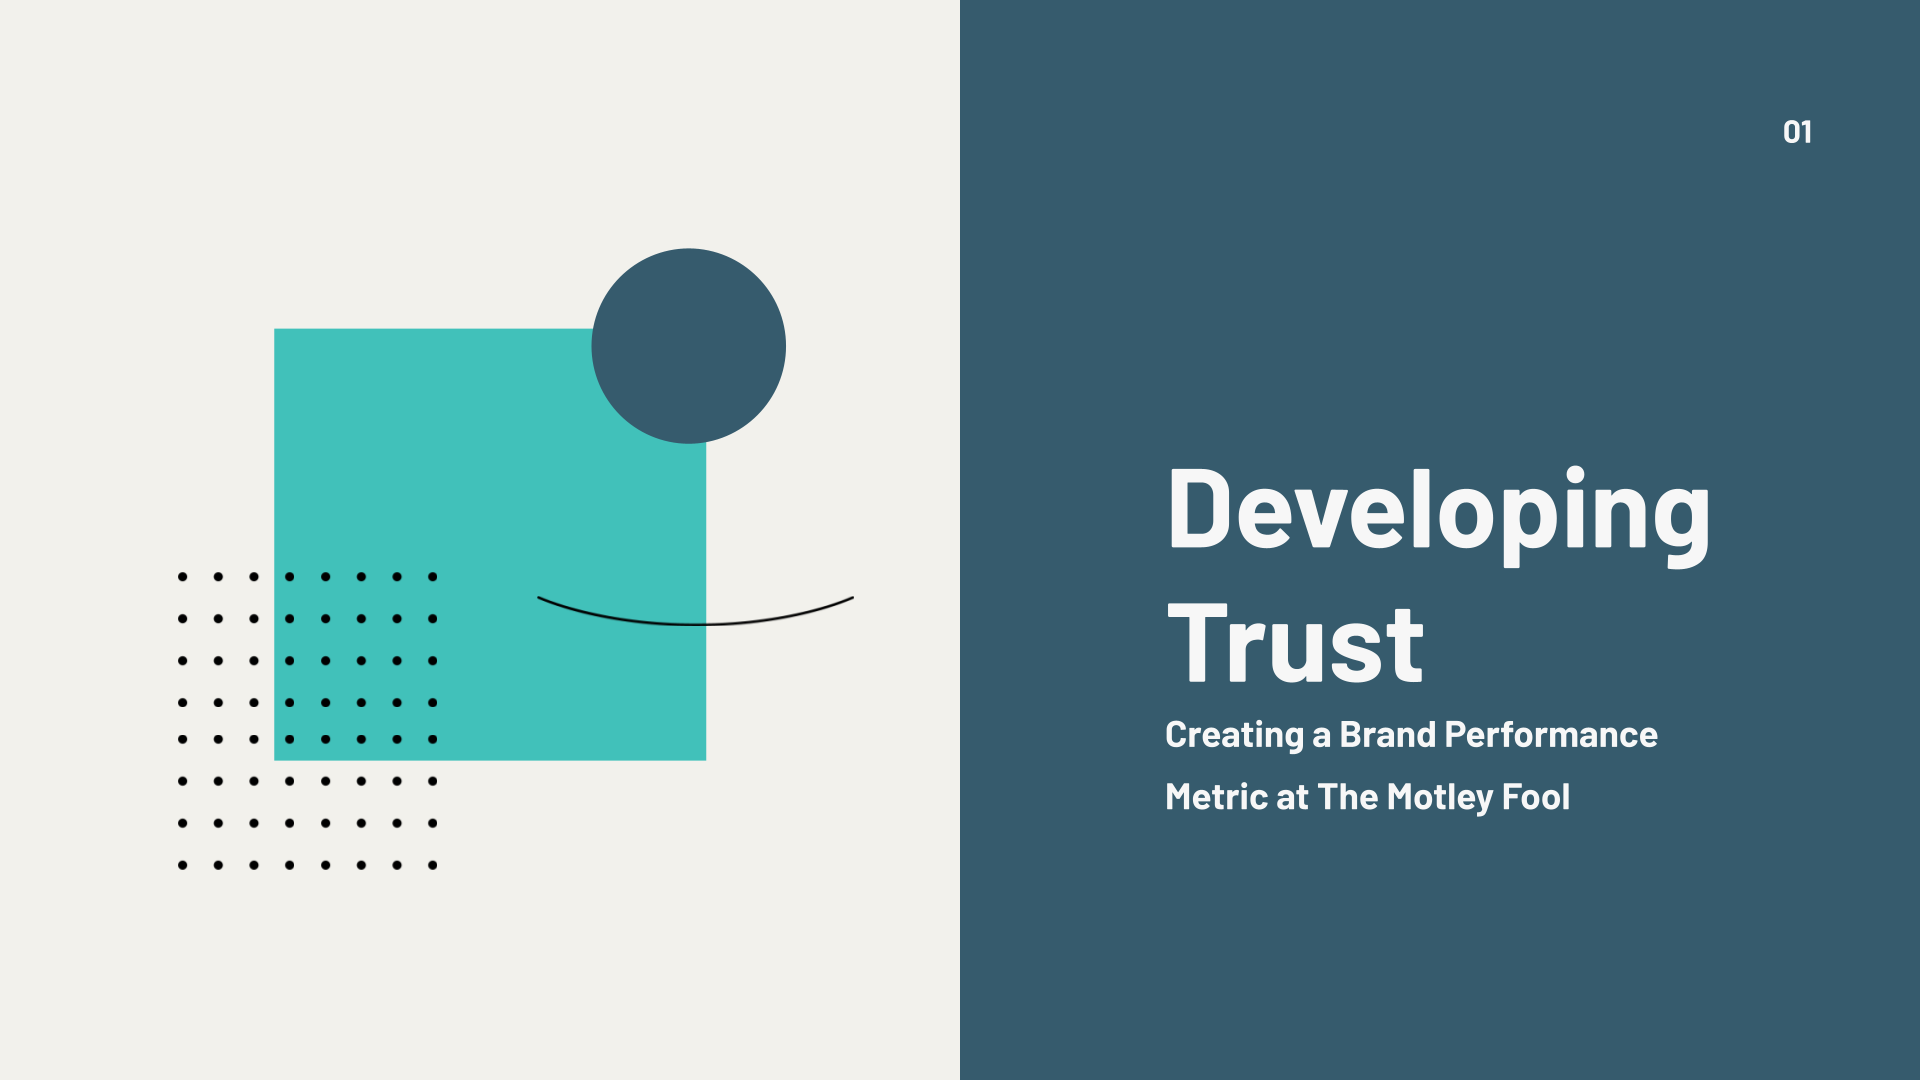 Developing Trust Metric Pres.pptx(1).png